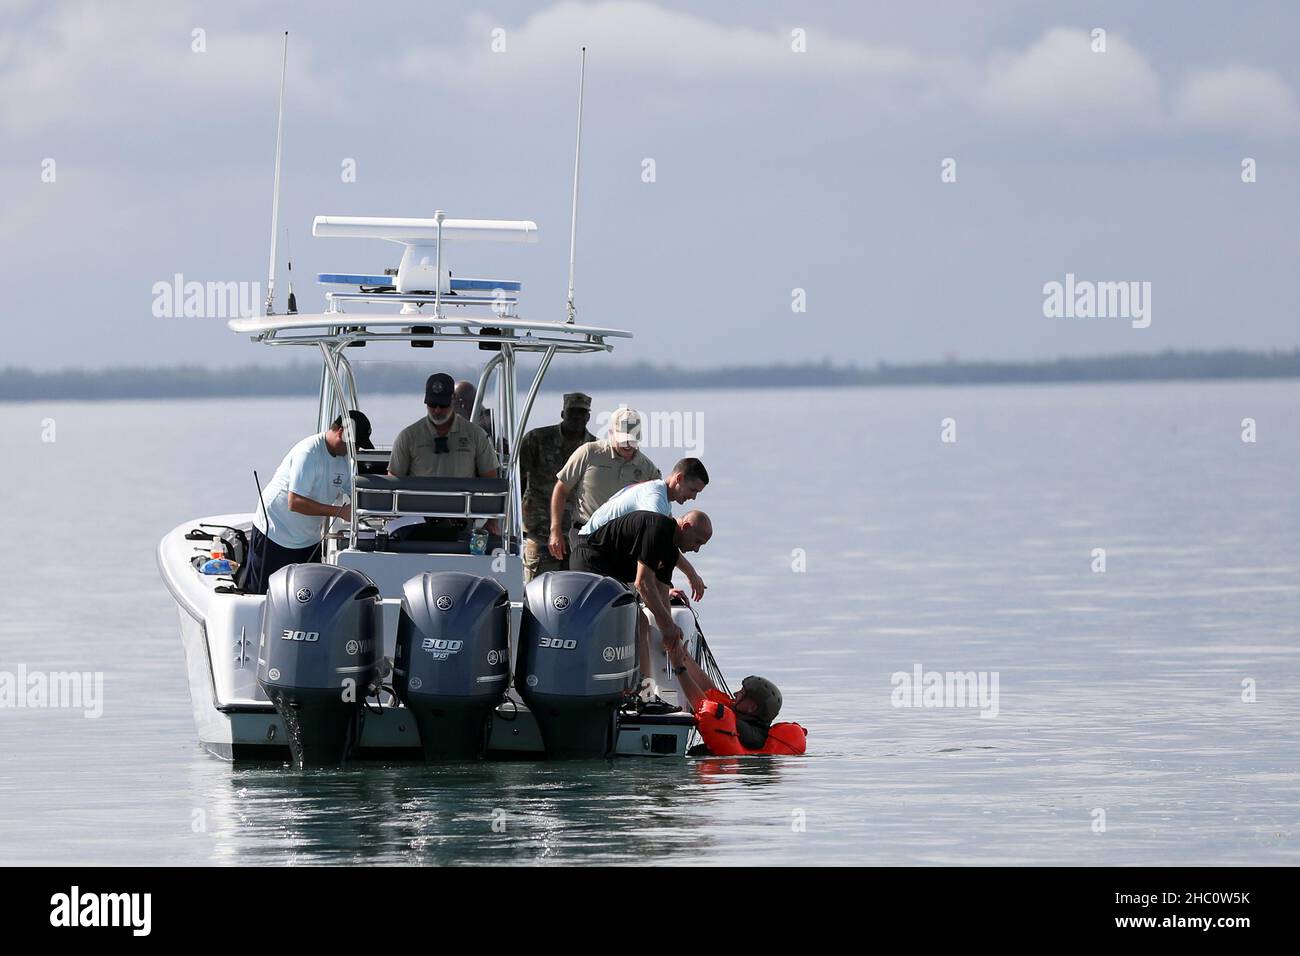 A U.S. Army Reserve paratrooper is assisted into a rescue boat following his Deliberate Water Jump into Biscayne Bay, Miami-Dade County on Nov. 19, 2021. The airborne operation was the culminating event of a weeklong training hosted by the 478th Civil Affairs Battalion (Airborne), Perrine, Florida, 1st Civil Affairs and Psychological Operations Training Brigade, U.S. Army Civil Affairs and Psychological Operations Command (Airborne).     The USACAPOC(A) weeklong training included a Jumpmaster Refresher course, the Army Reserve Airborne Safety Equipment and Evaluation Council, airborne operatio Stock Photo